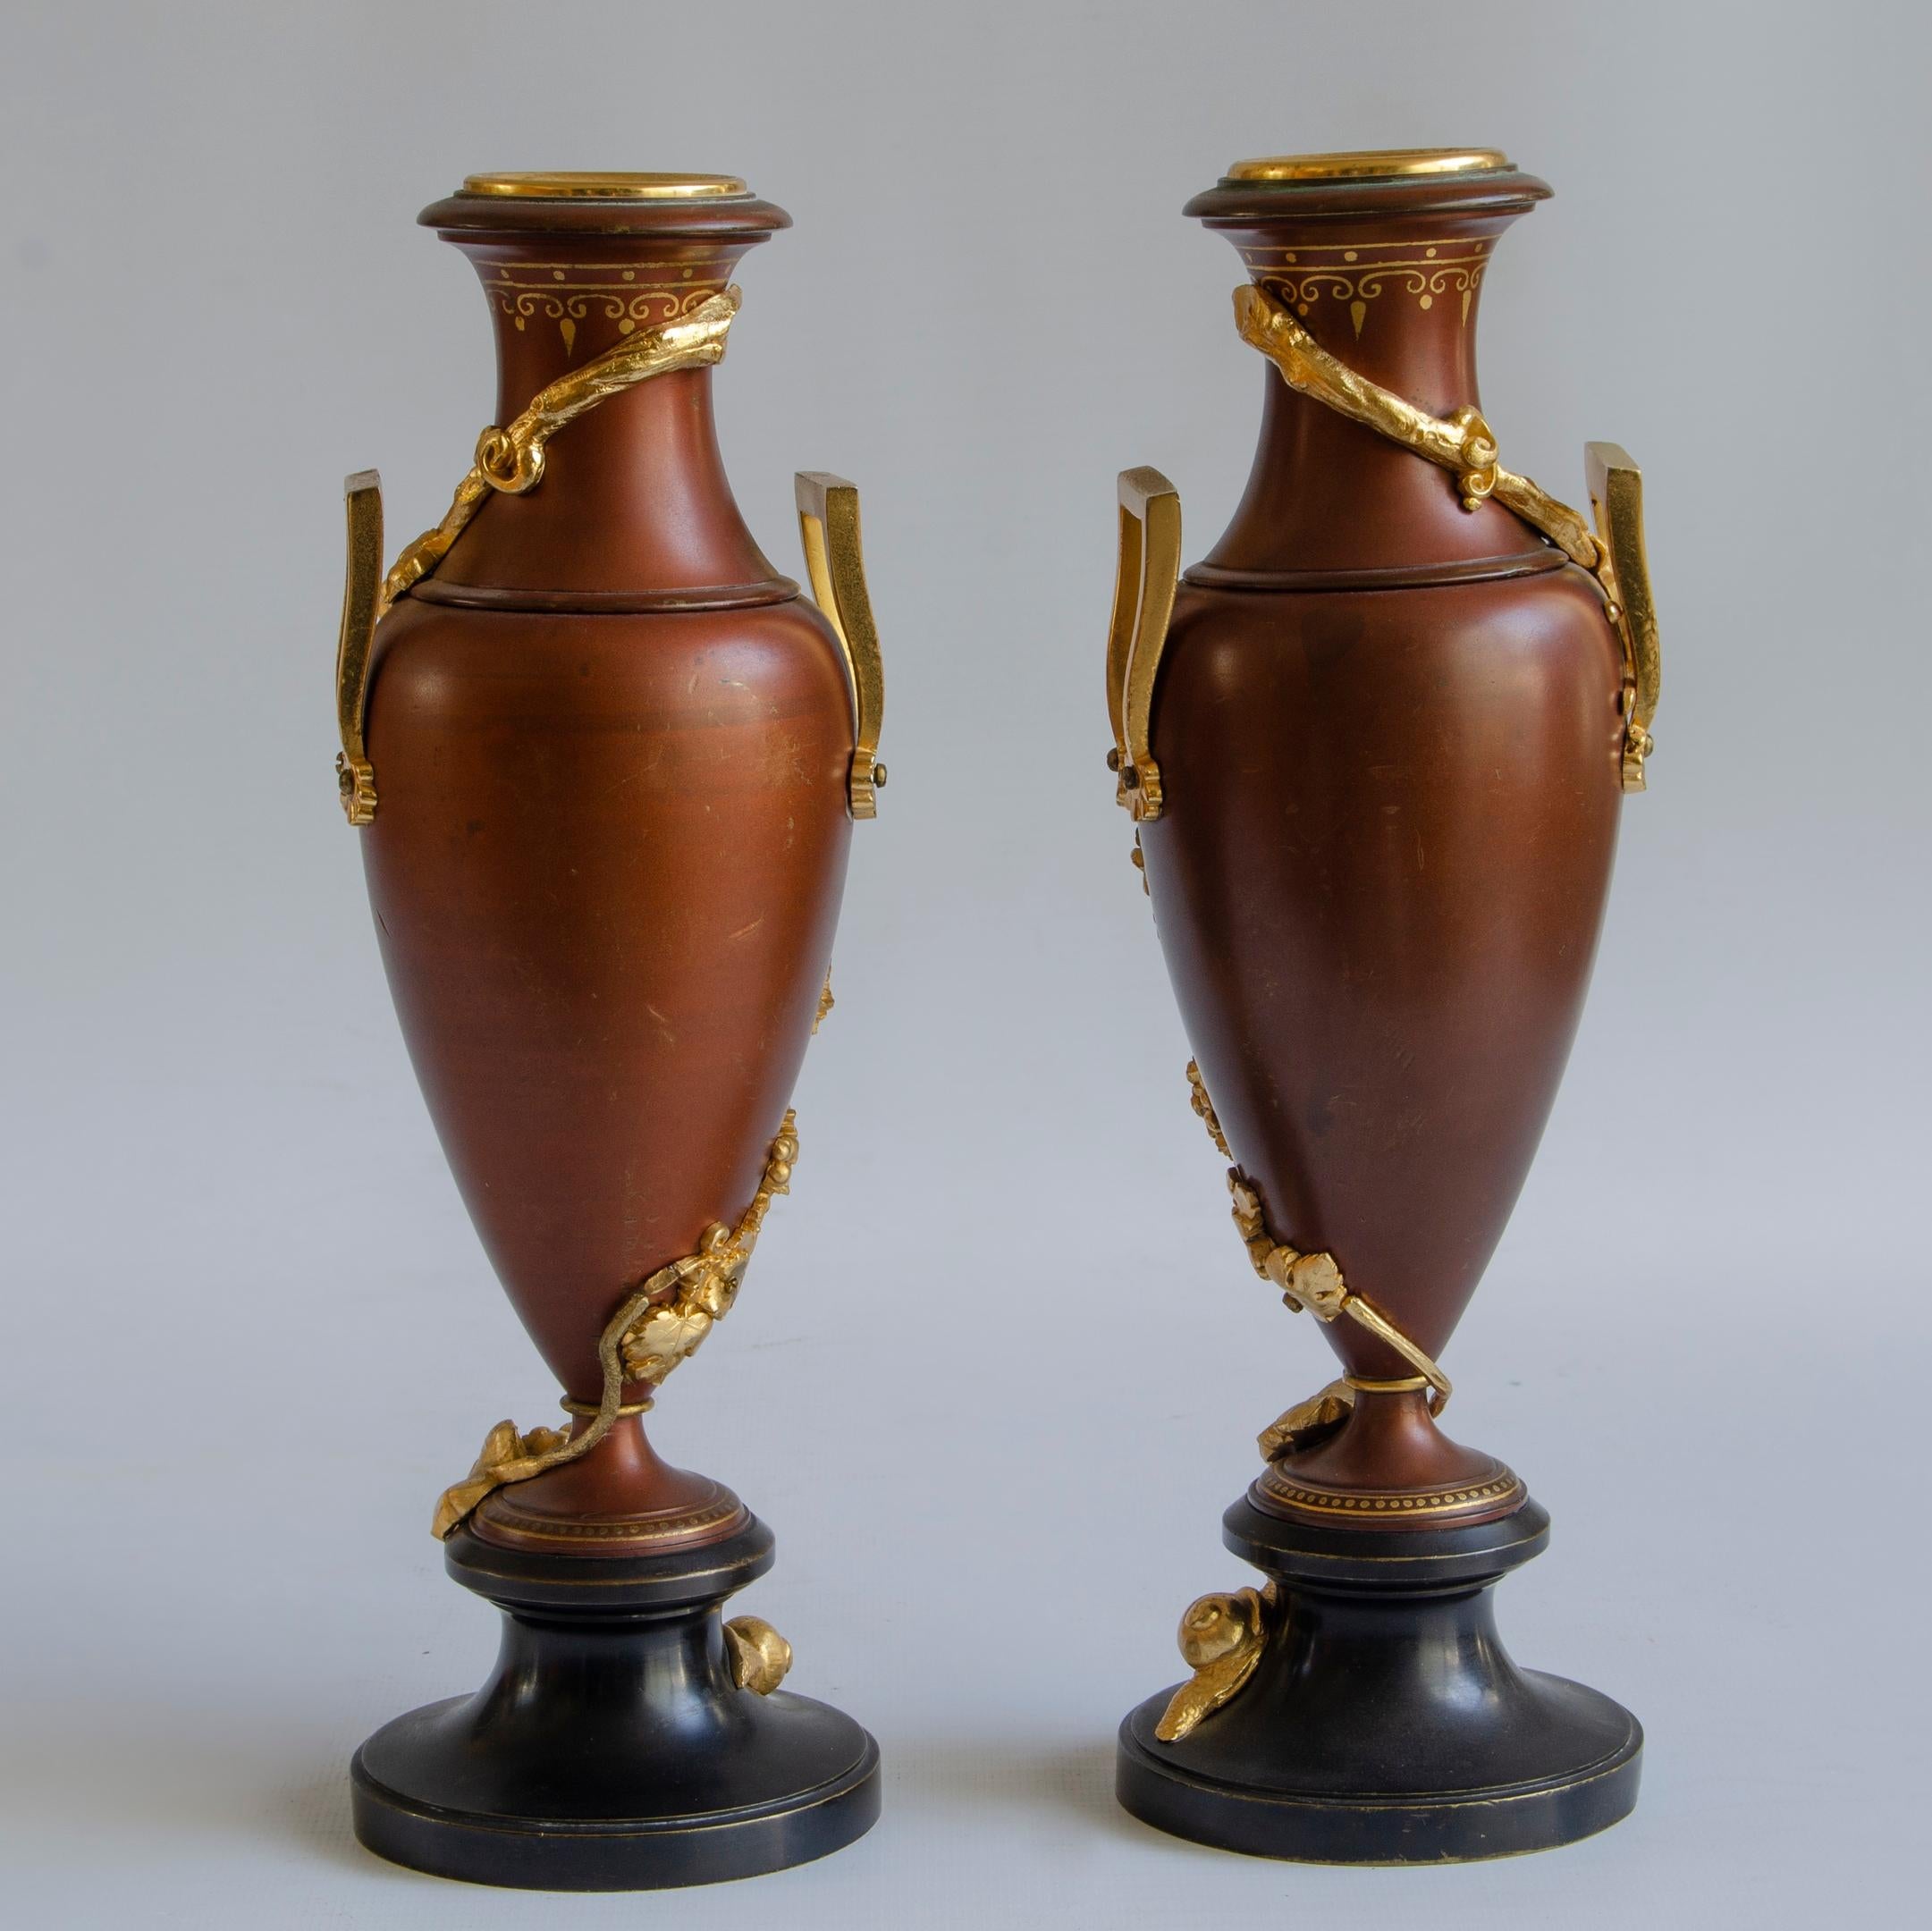 A pair of Art nouveau amphorae
patinated bronze and gilt,
circa 1910
decorated with vine plants and snails
Origin France
perfect condition.
Art nouveau, modernist art or modernism was an international artistic and decorative movement, developed